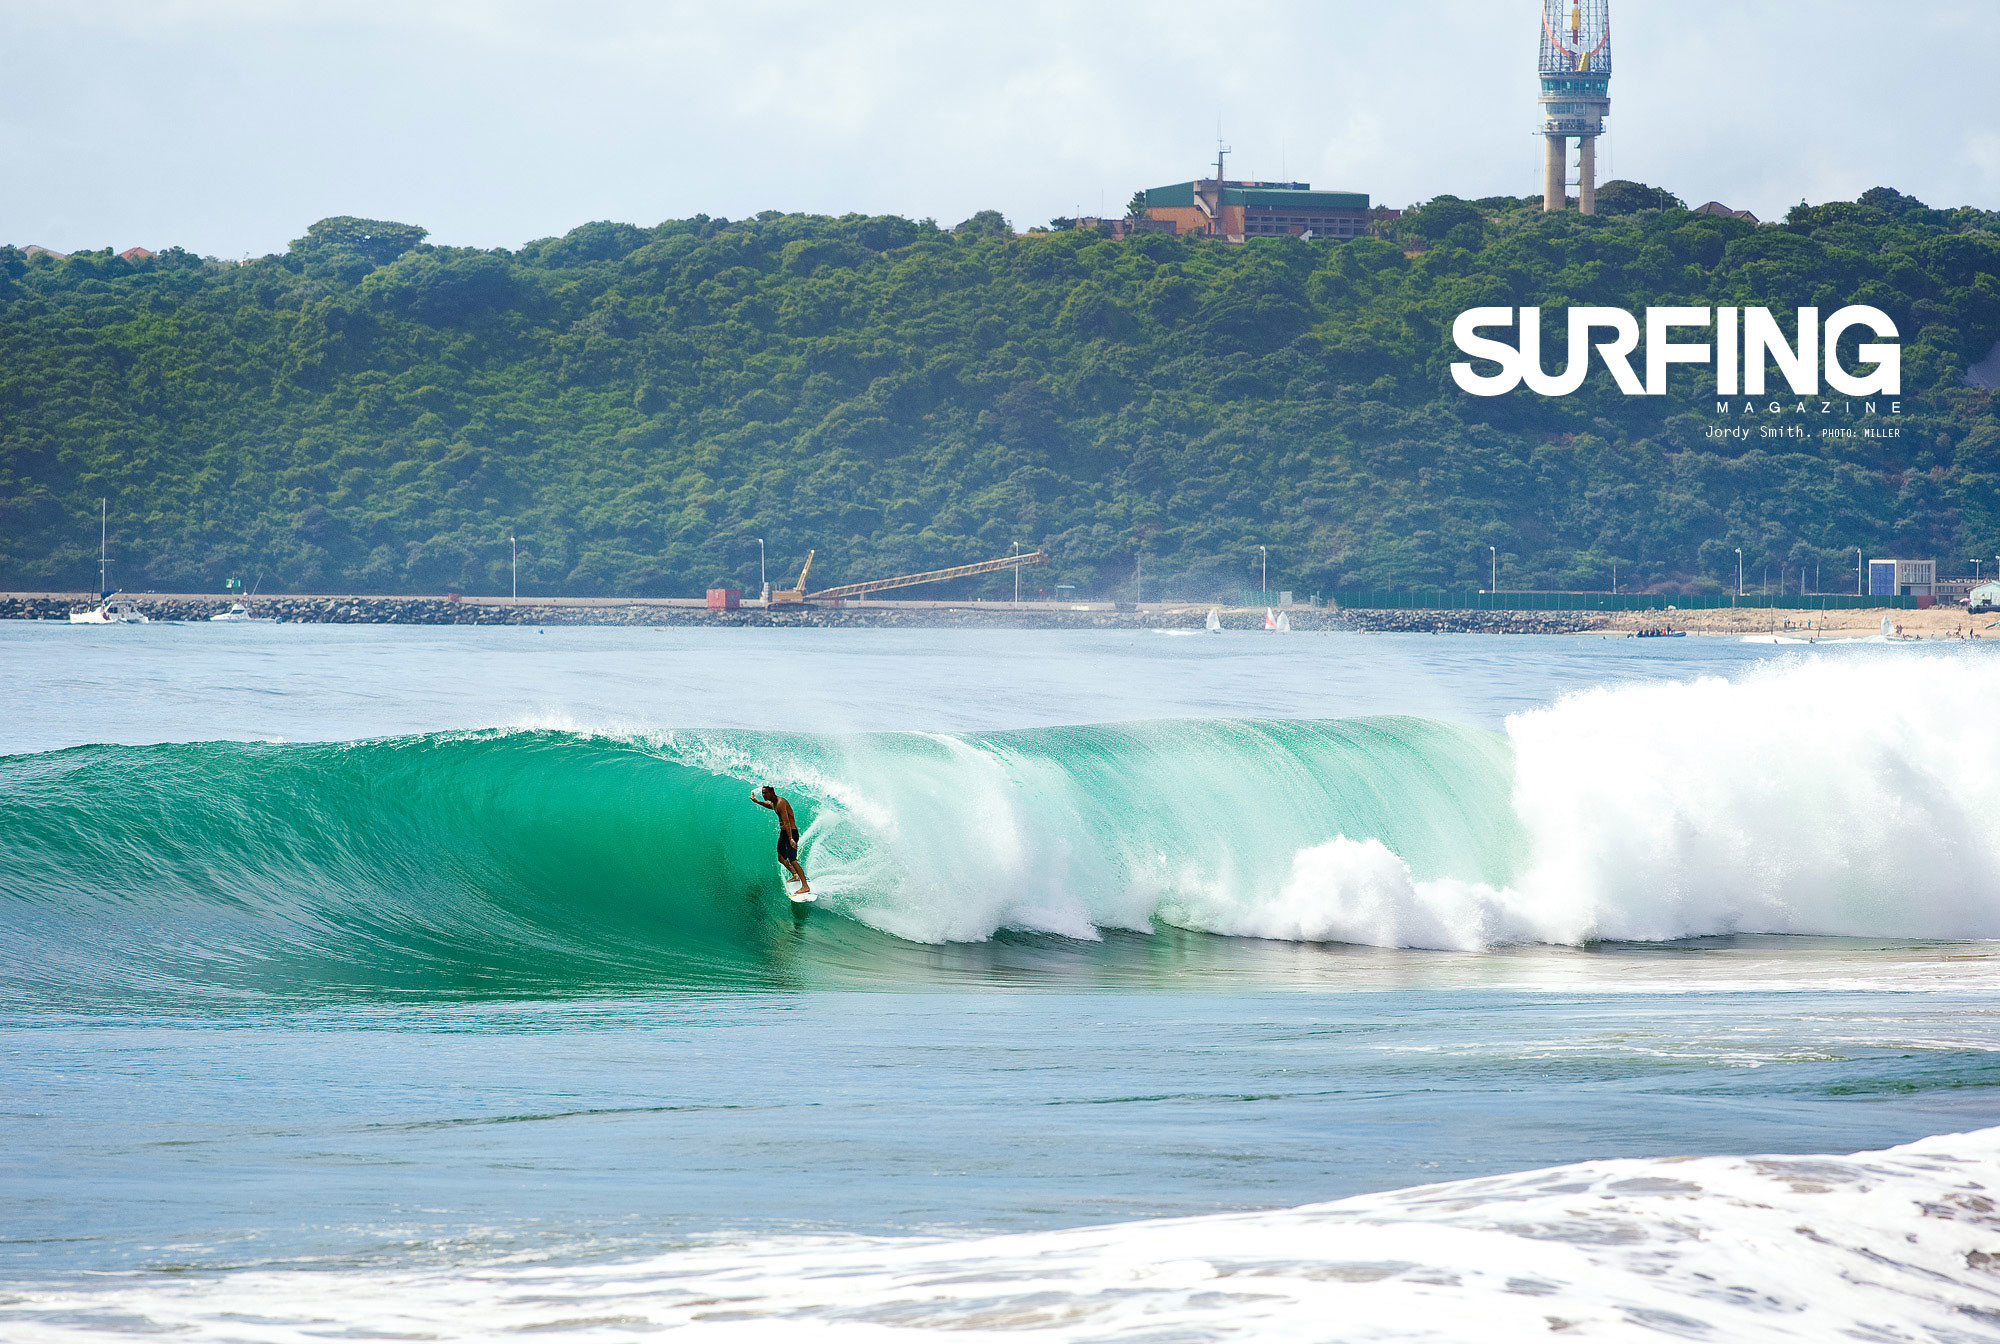 Surfing Wallpaper for PC, Mobile